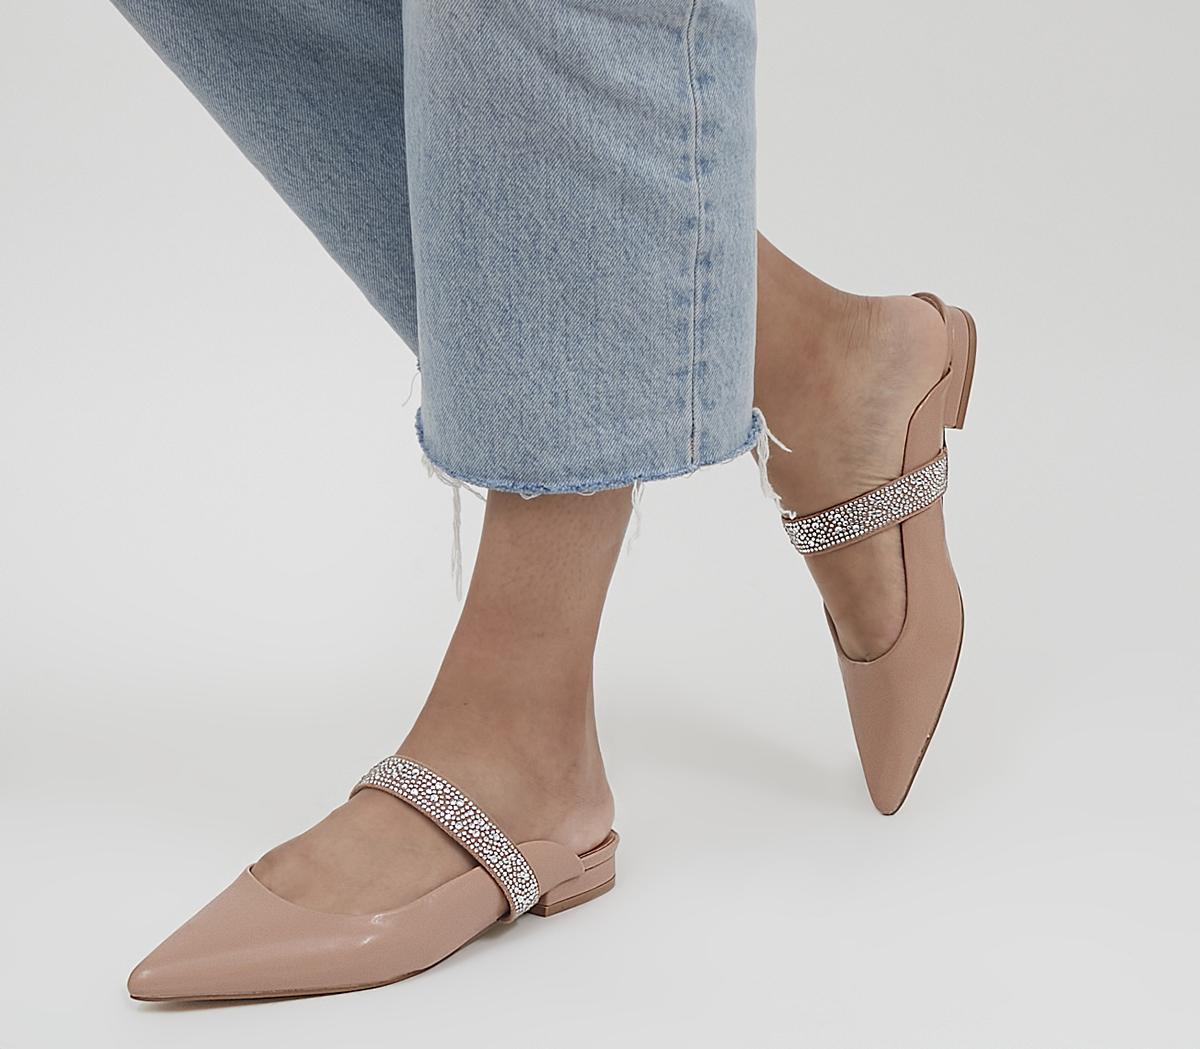 OfficeFlissie Feature Strap MulesNude With Embellishment